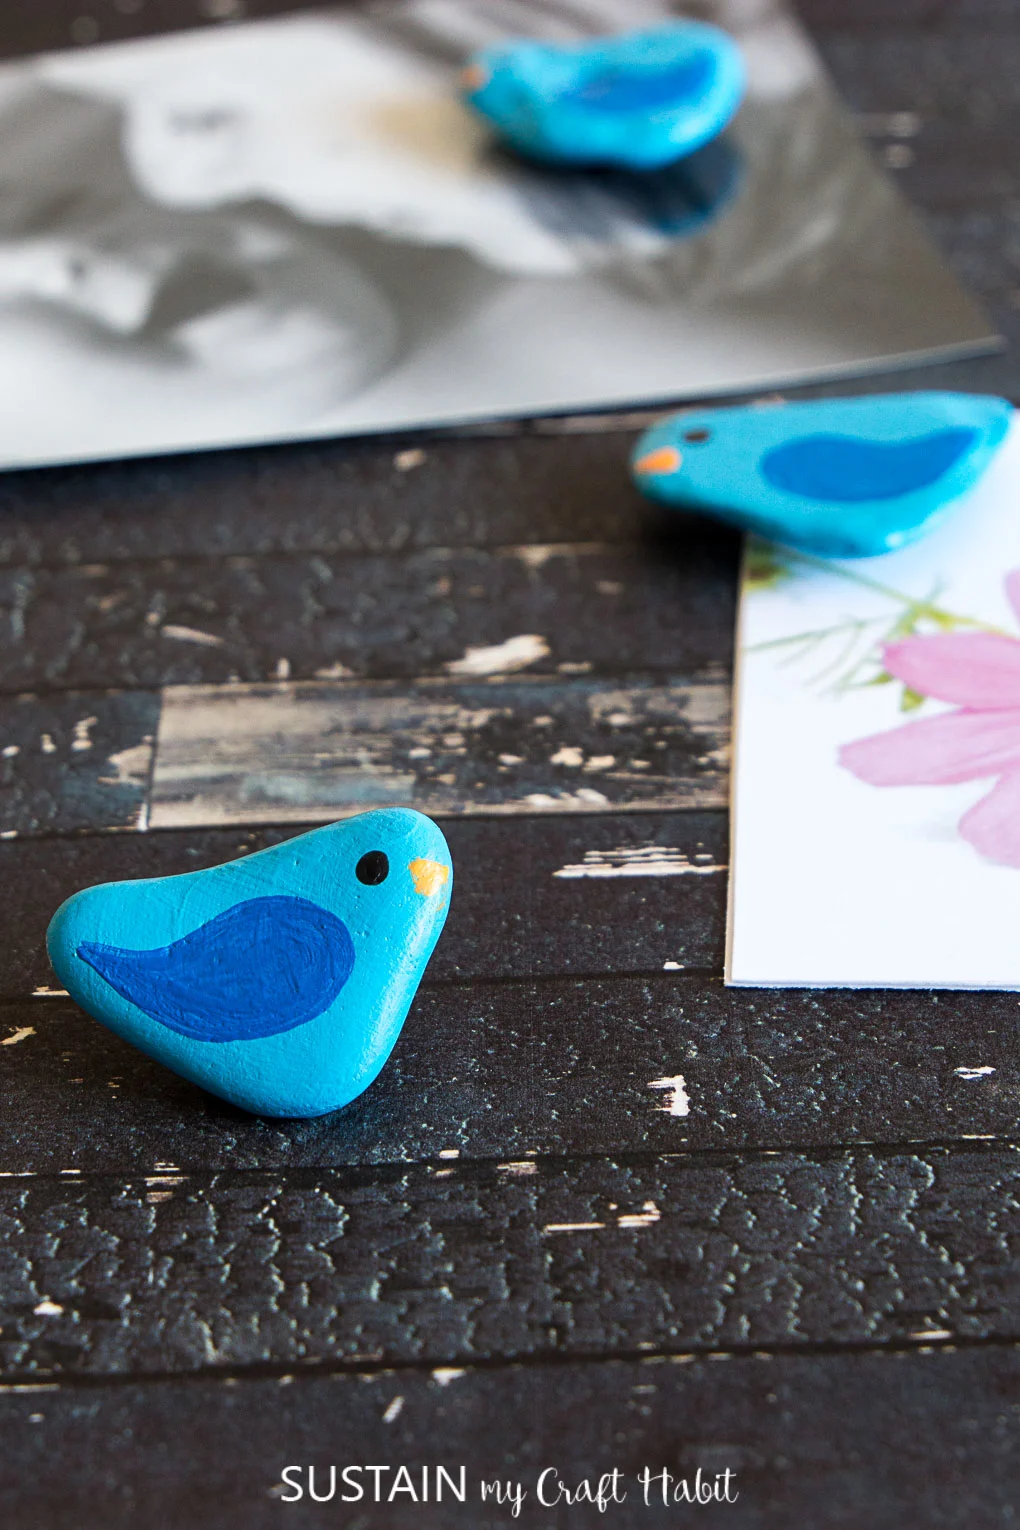 Cute Things to Paint for Beginners - Mod Podge Rocks